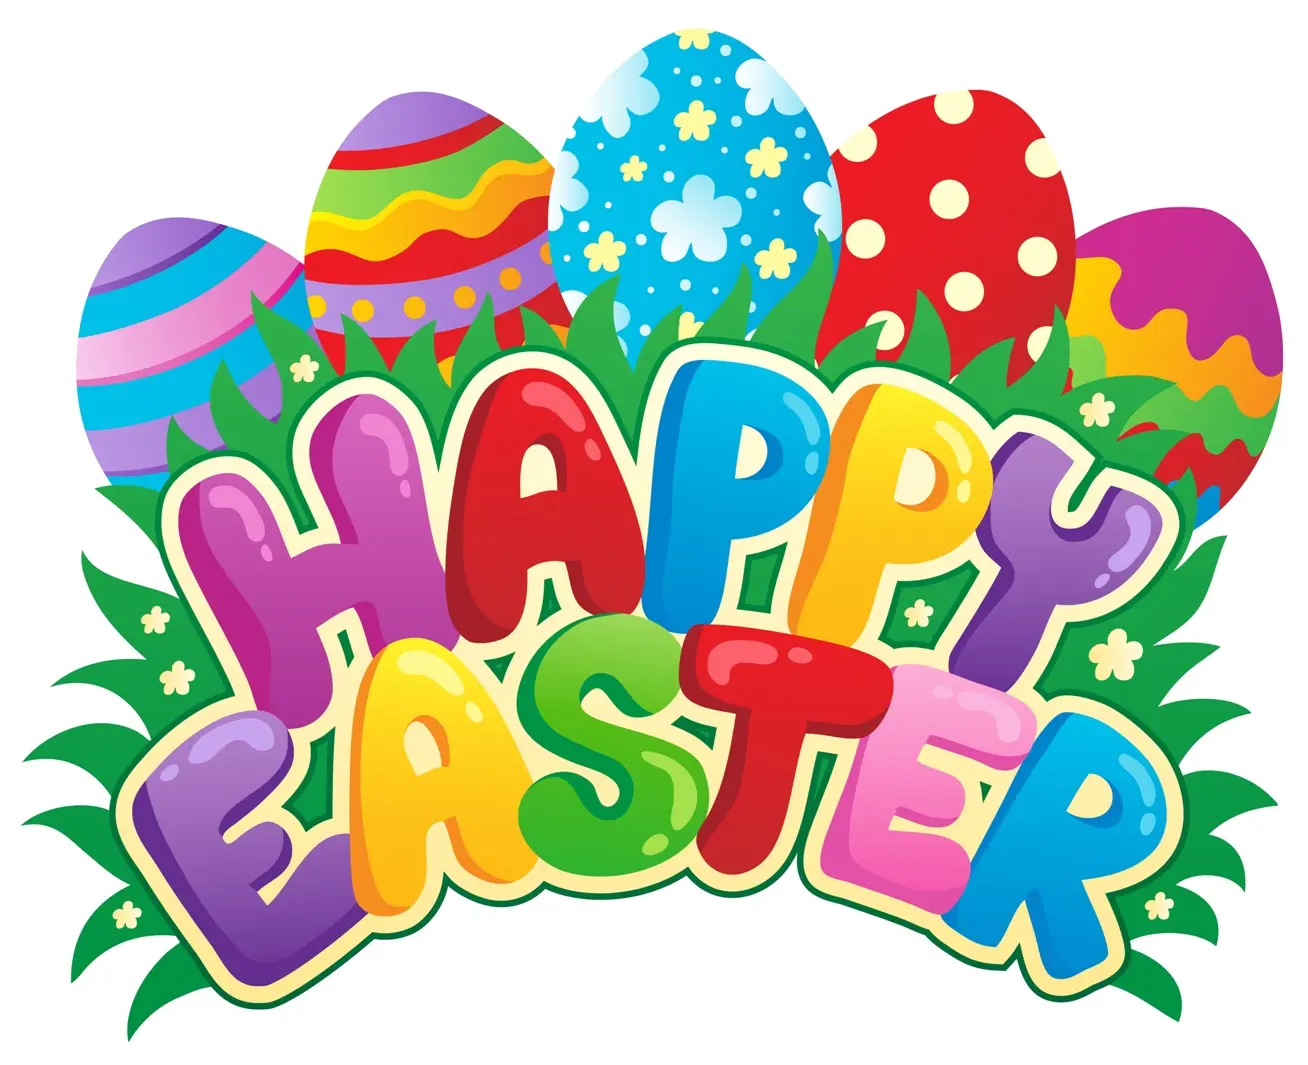 Colourful-Artistic-Happy-Easter-Charity-eCard.webp